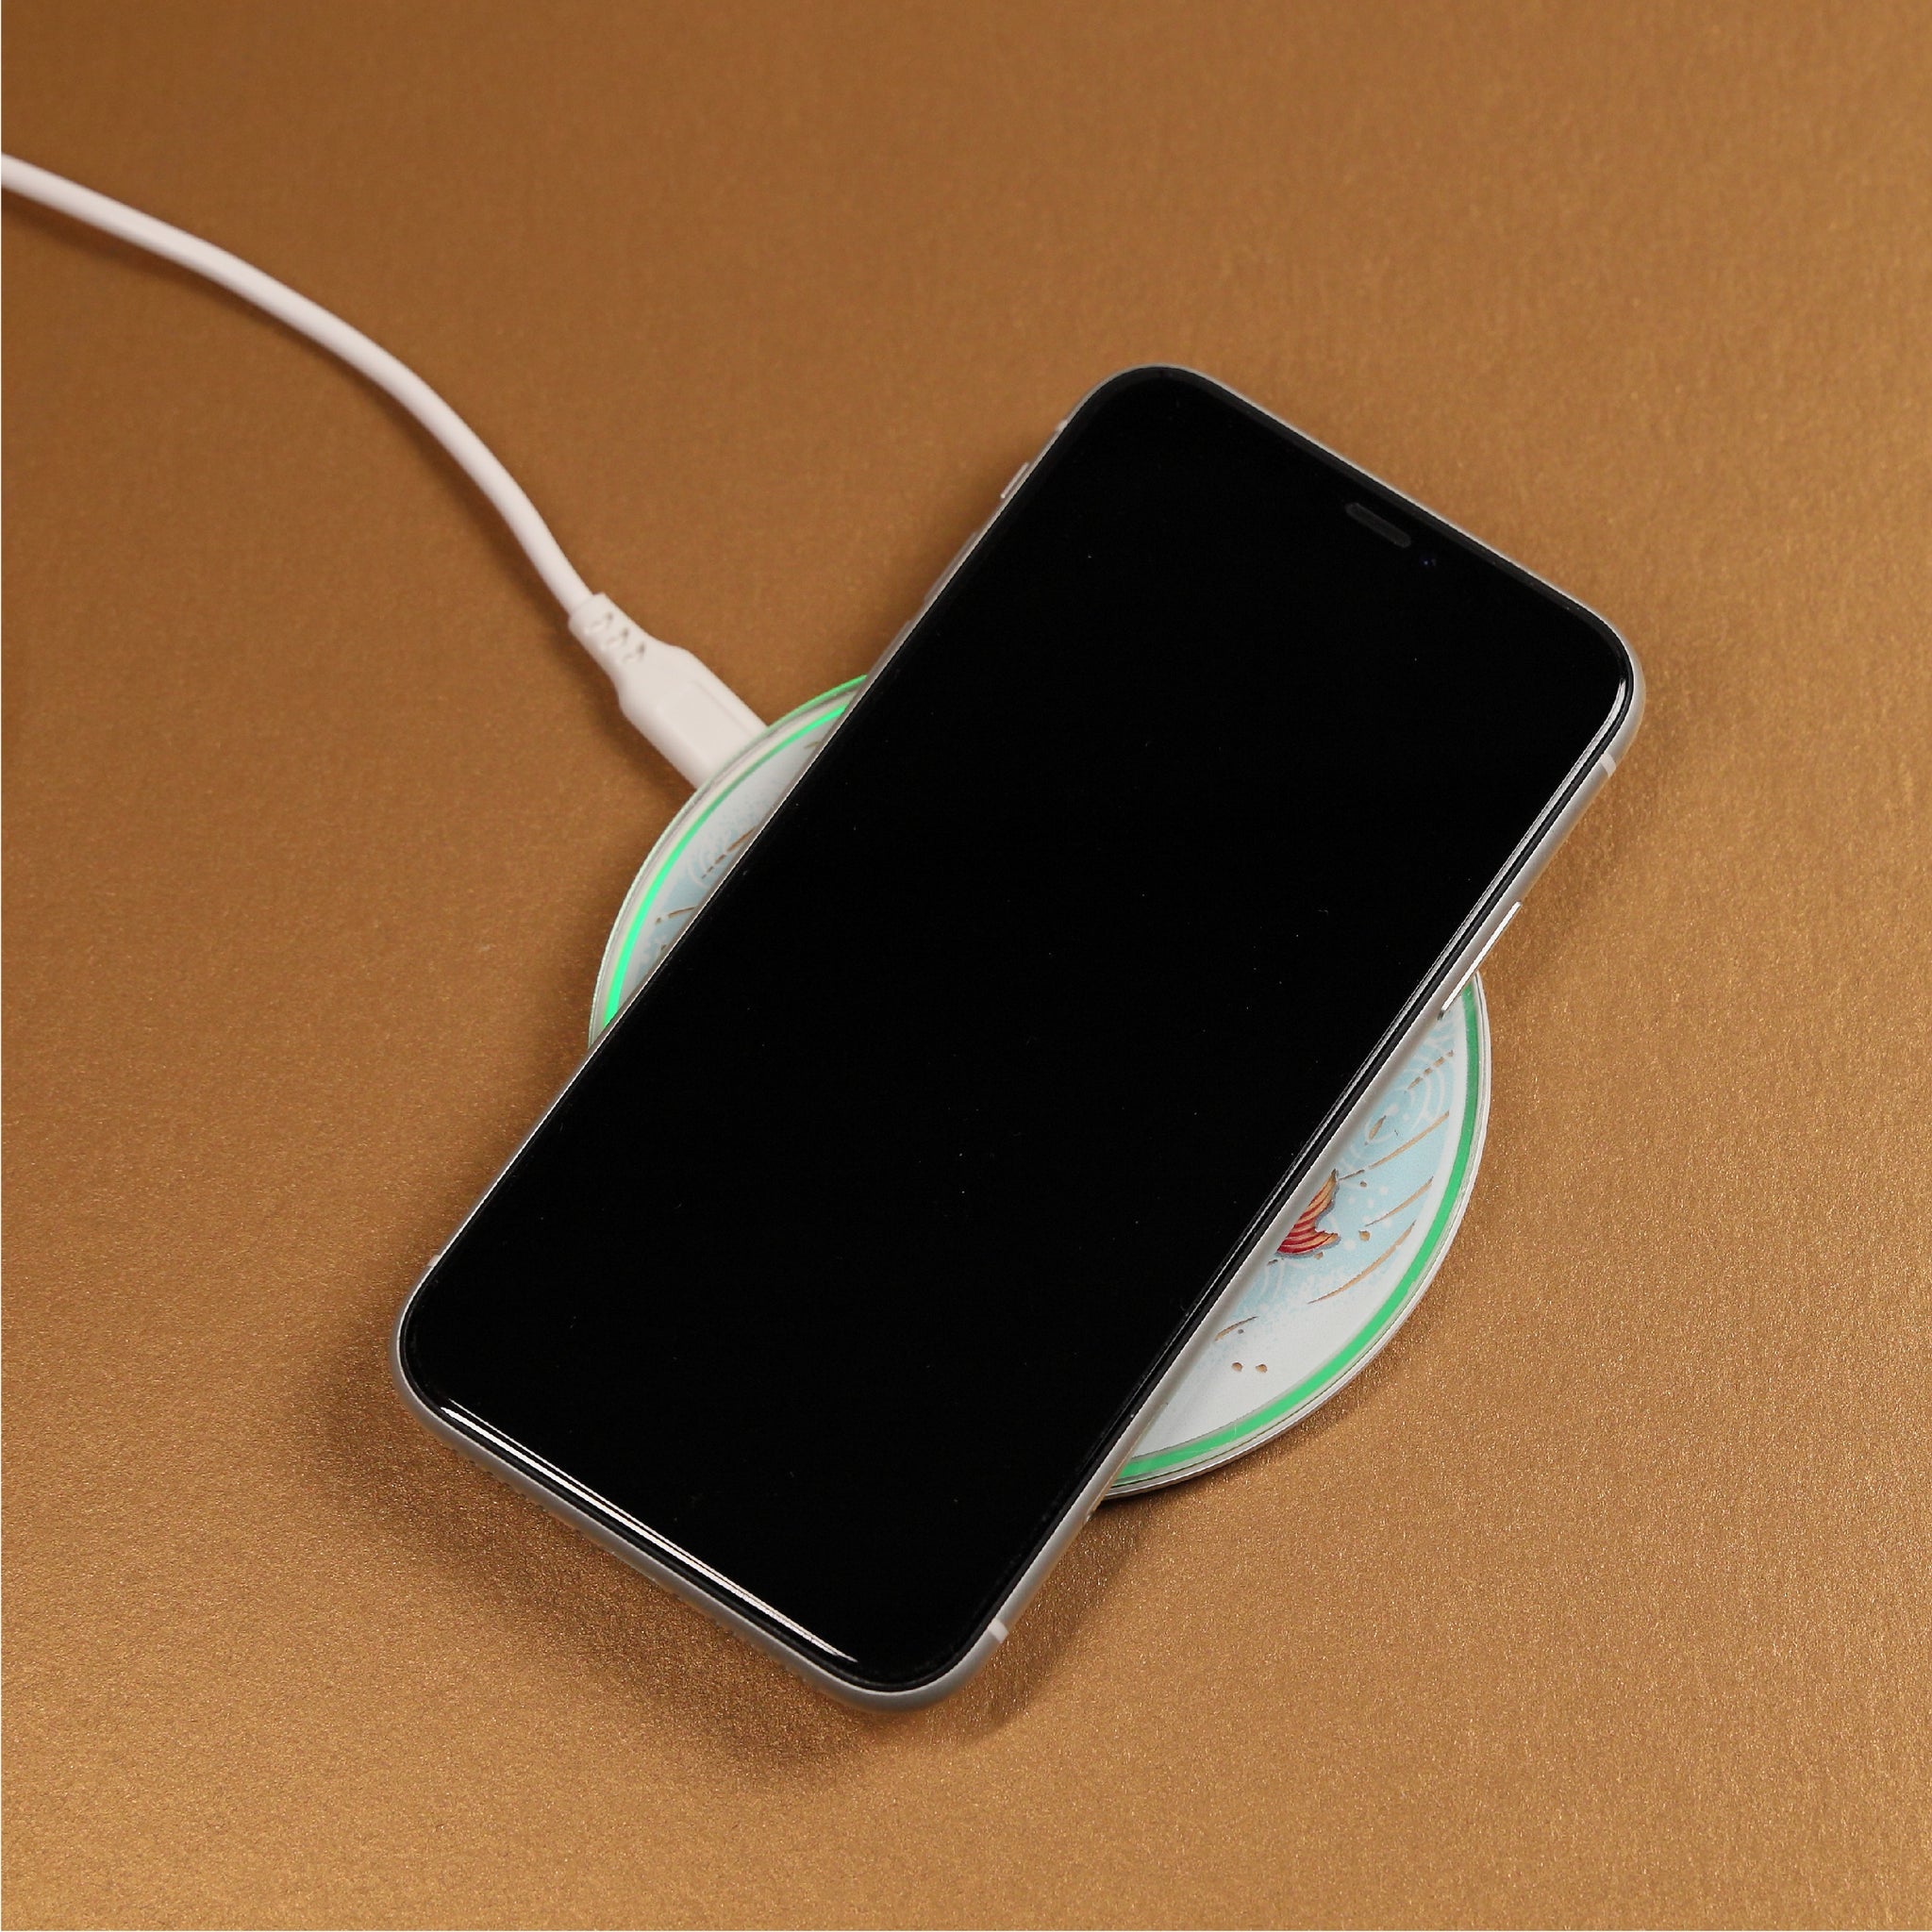 Golden Fish Wireless Charger By FingerART